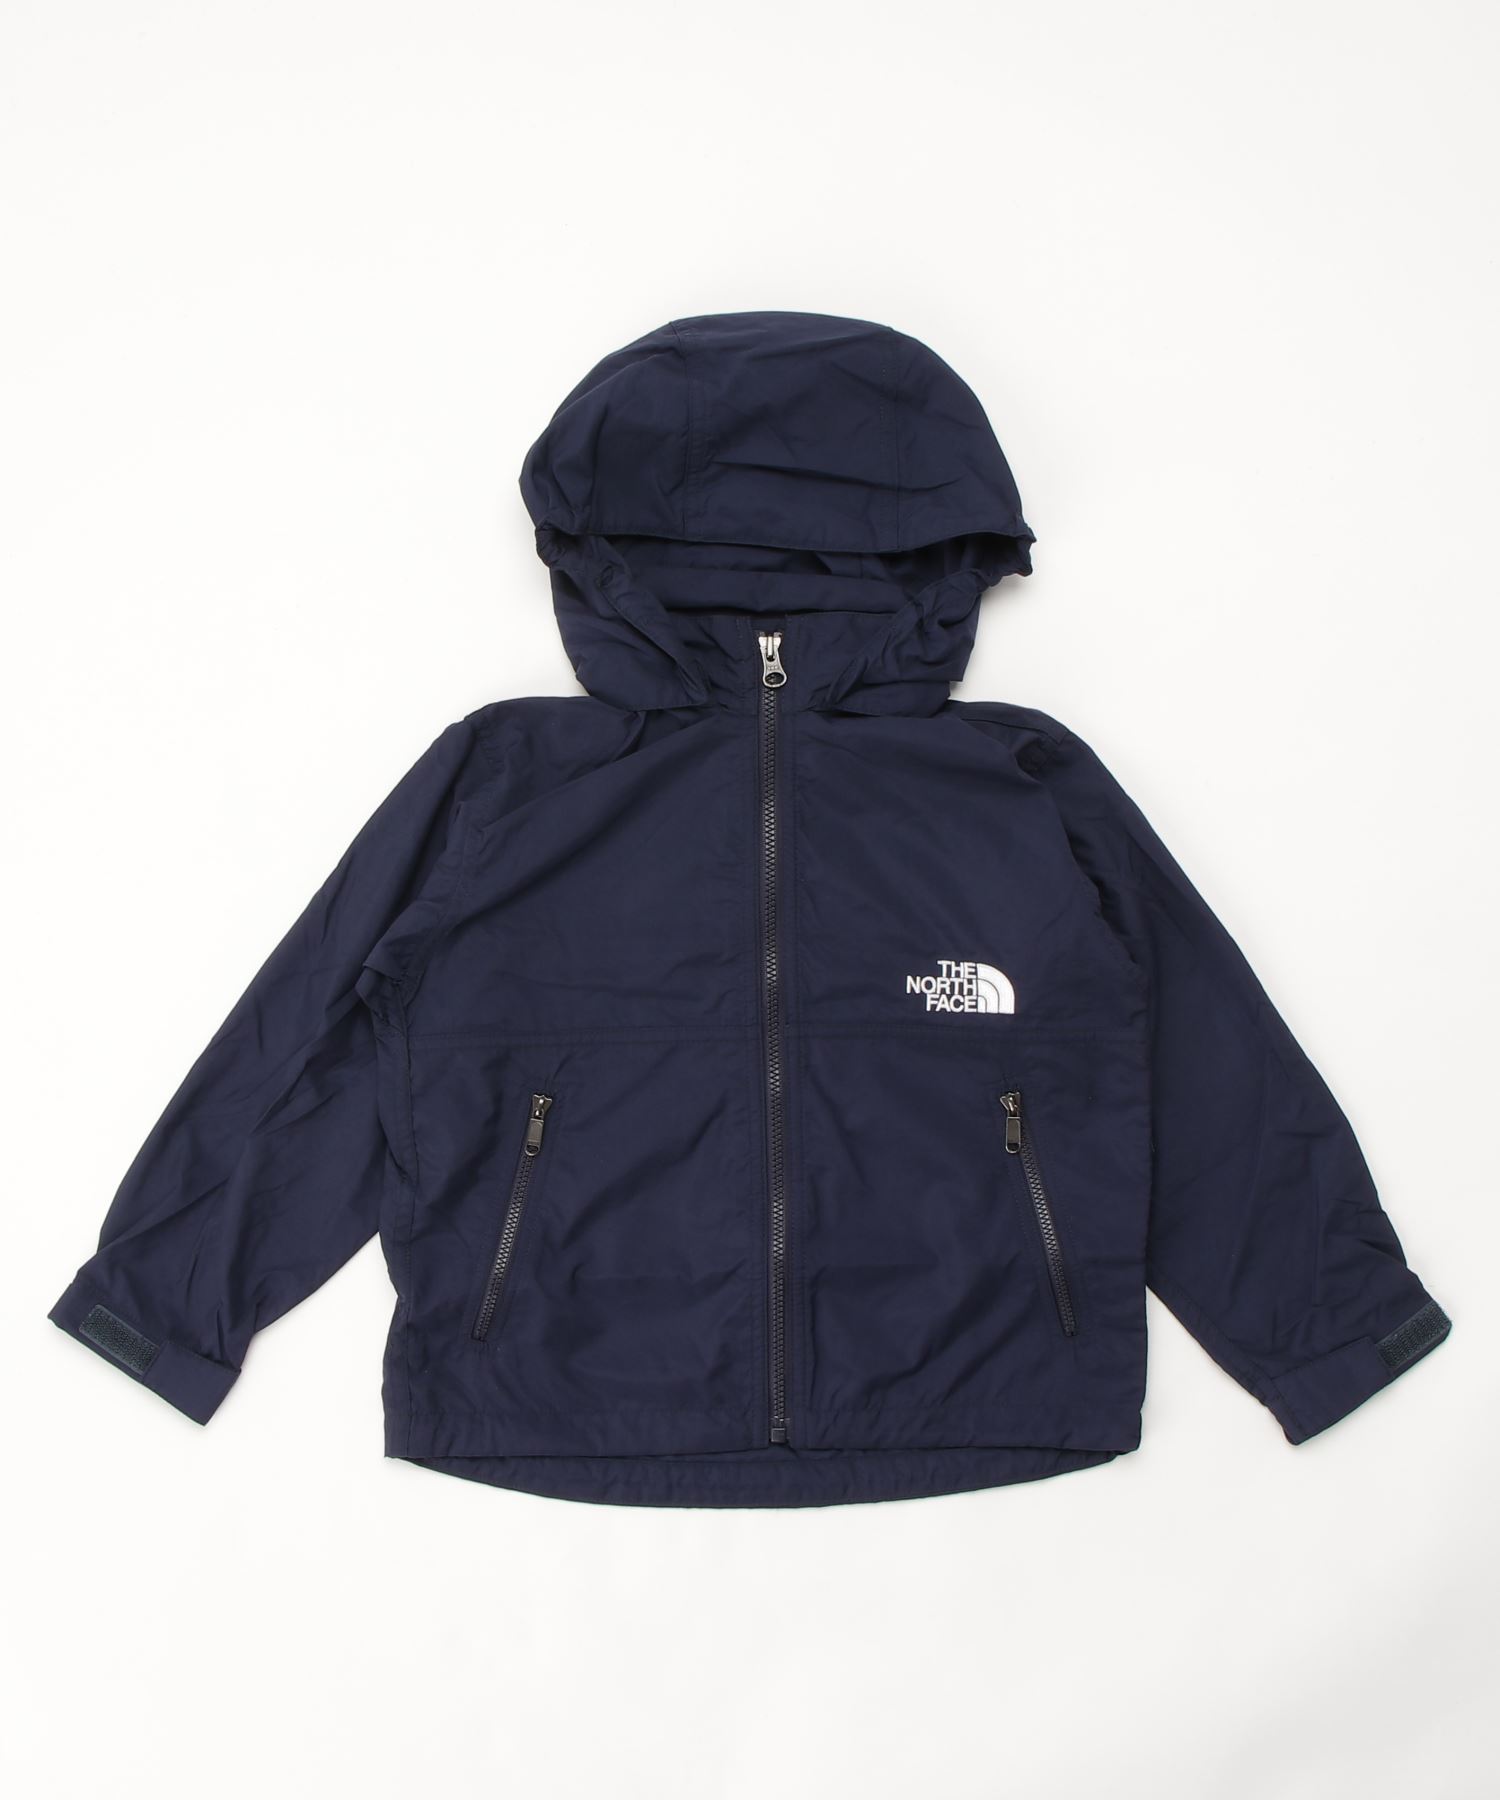 THE NORTH FACEザ 人気特価 ノース フェイス Compact Jacket FACE コンパクトジャケット メール便不可